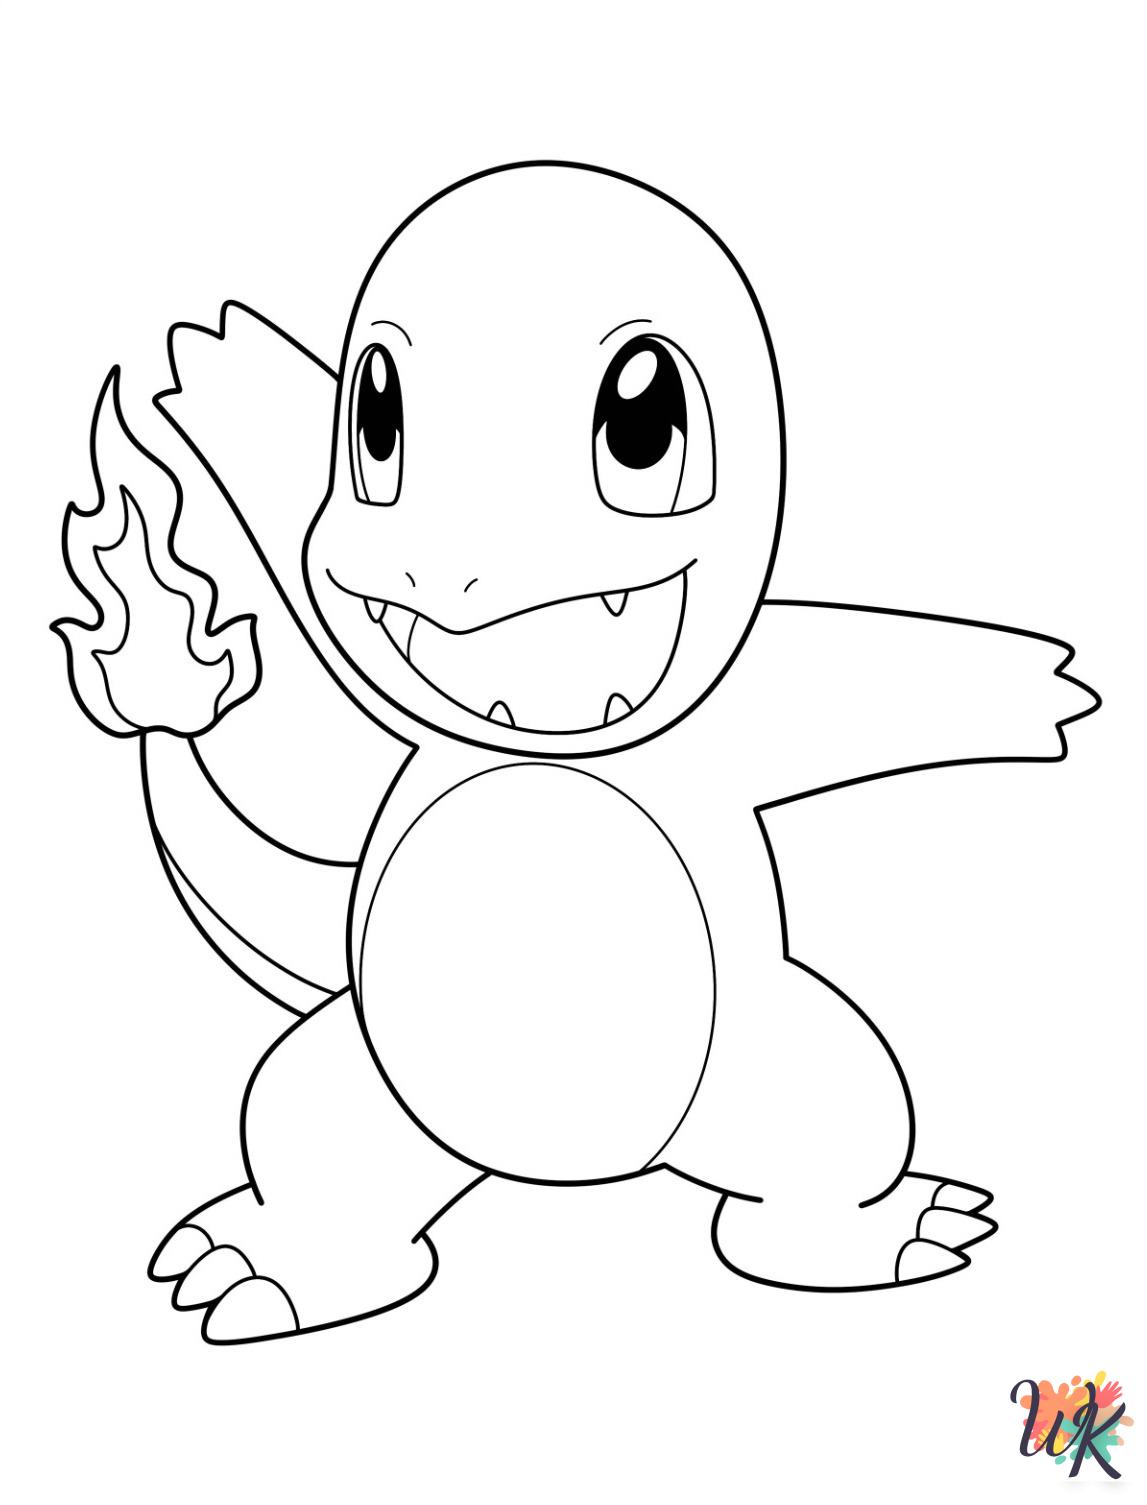 Charmander coloring pages easy